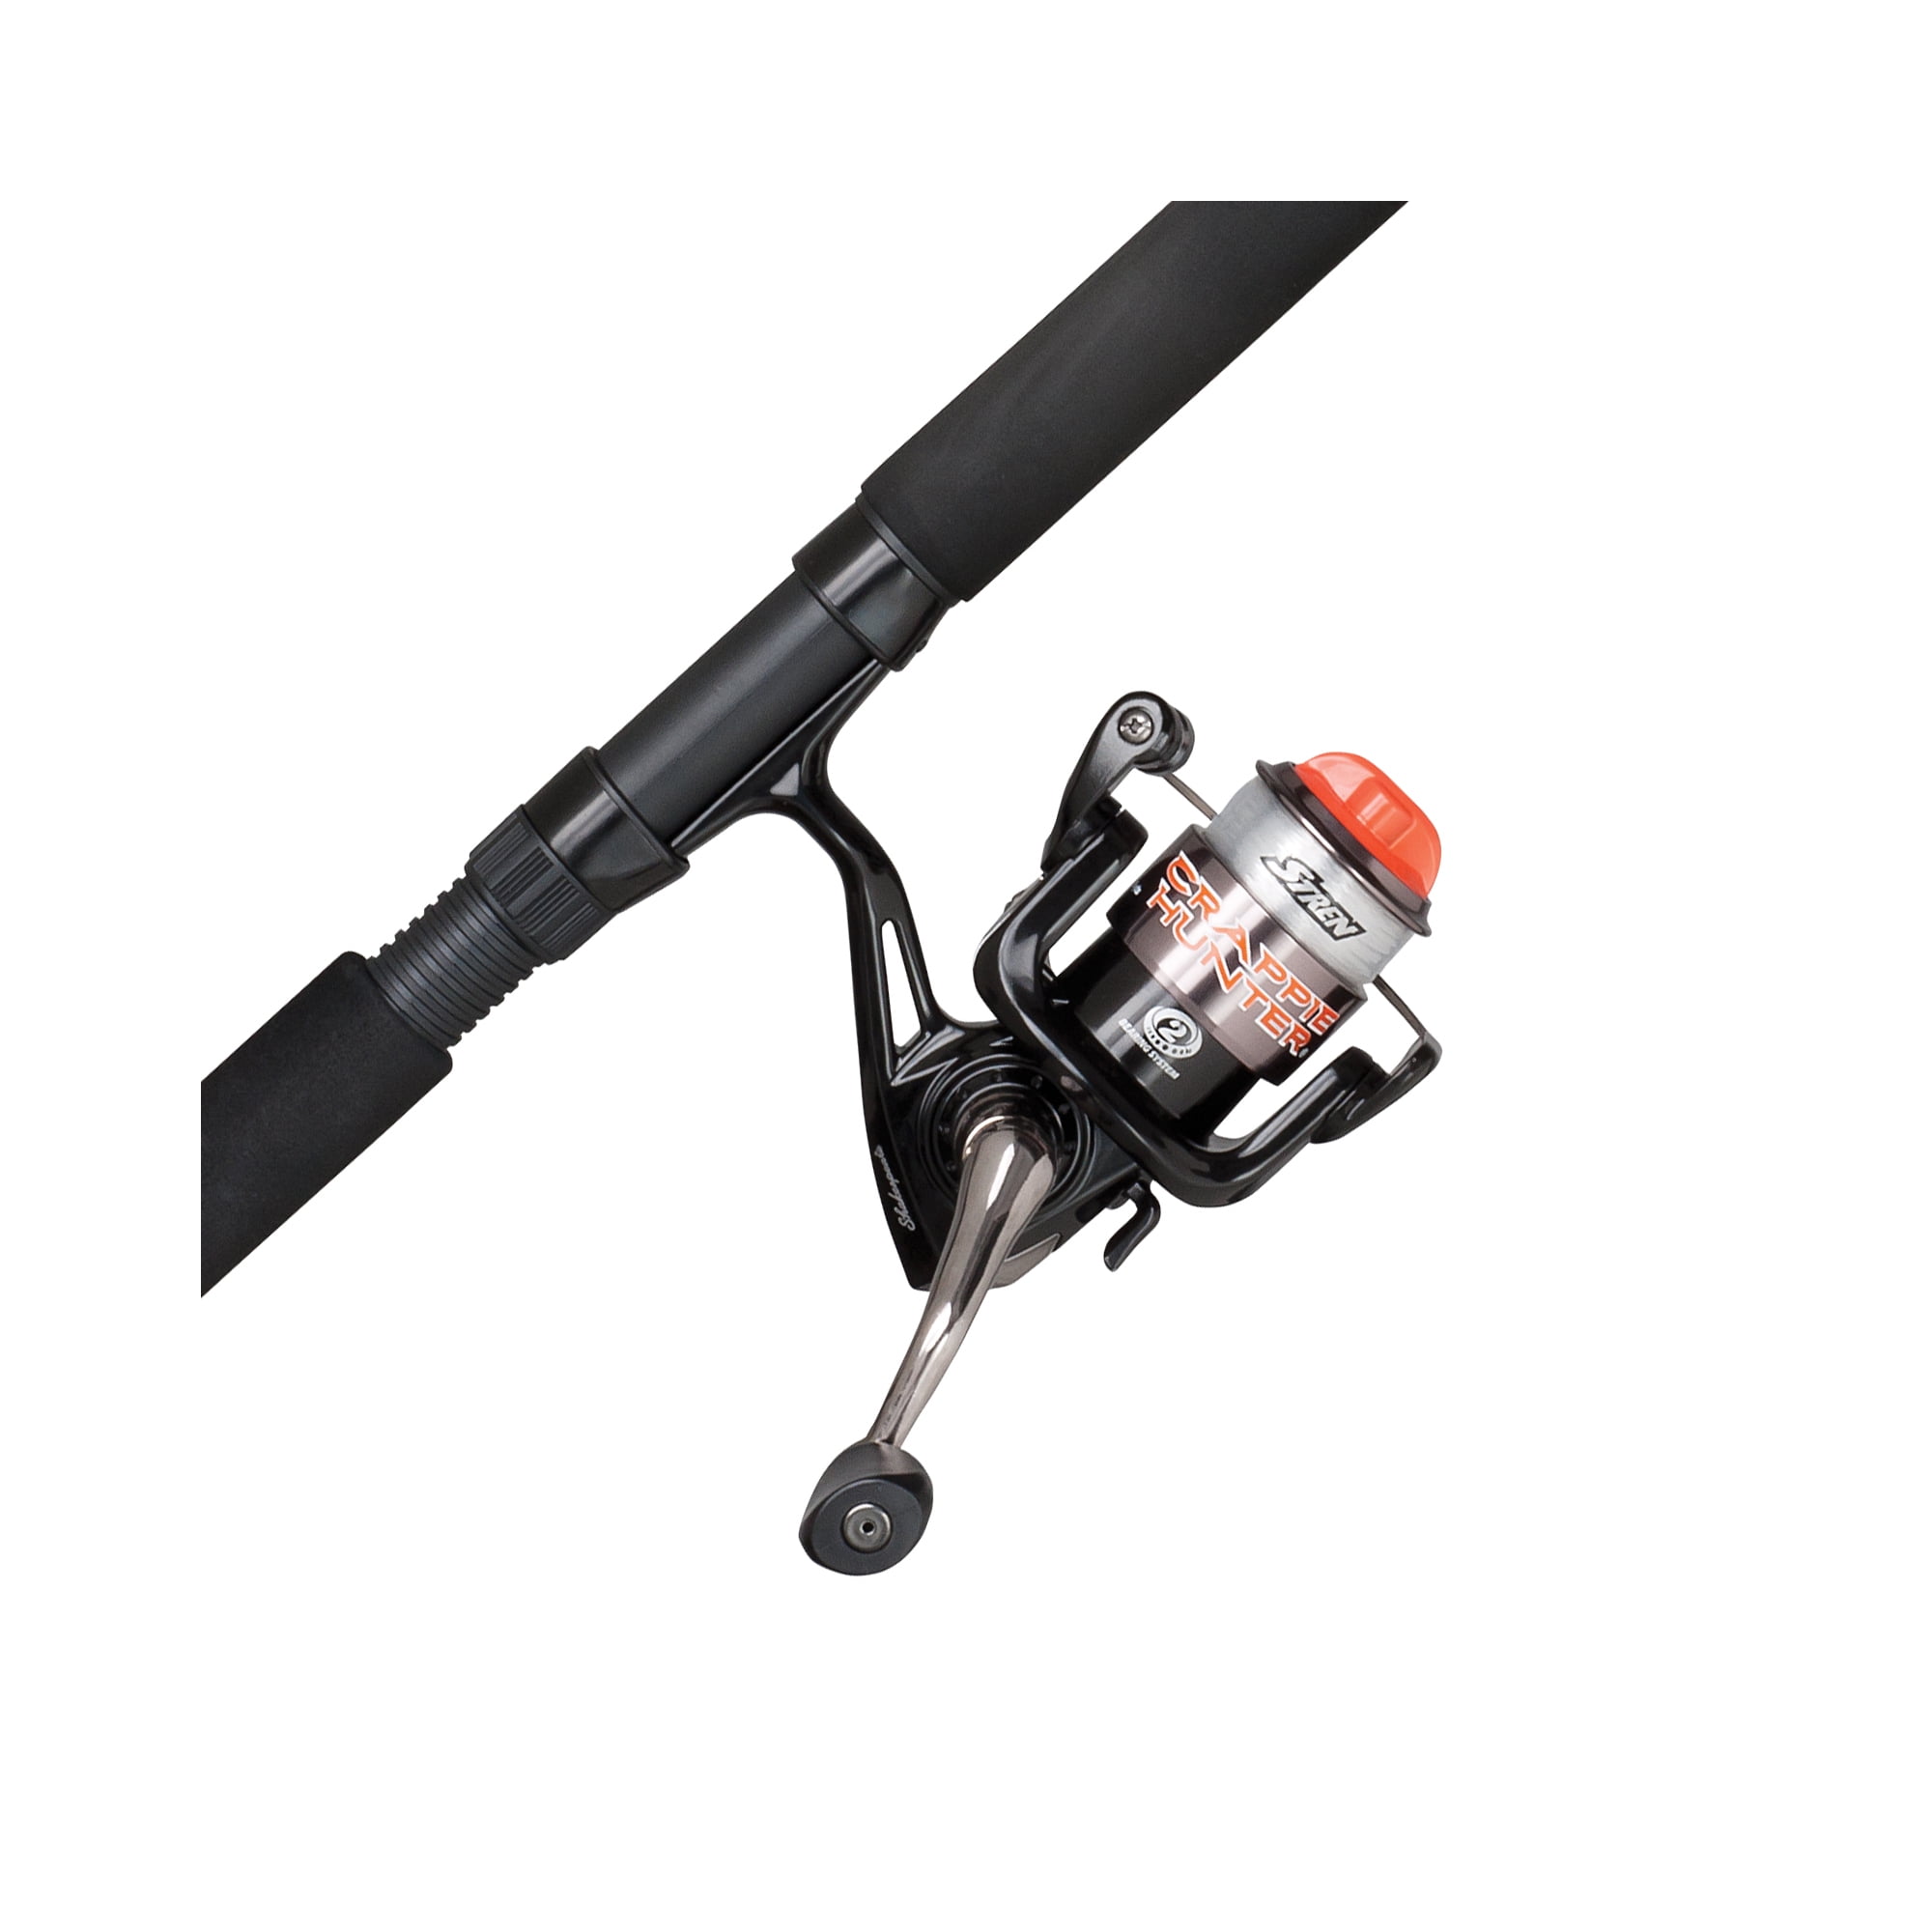 Details about   Shakespeare Agility Low Profile Baitcast Reel and Fishing Rod Combo Black NEW 